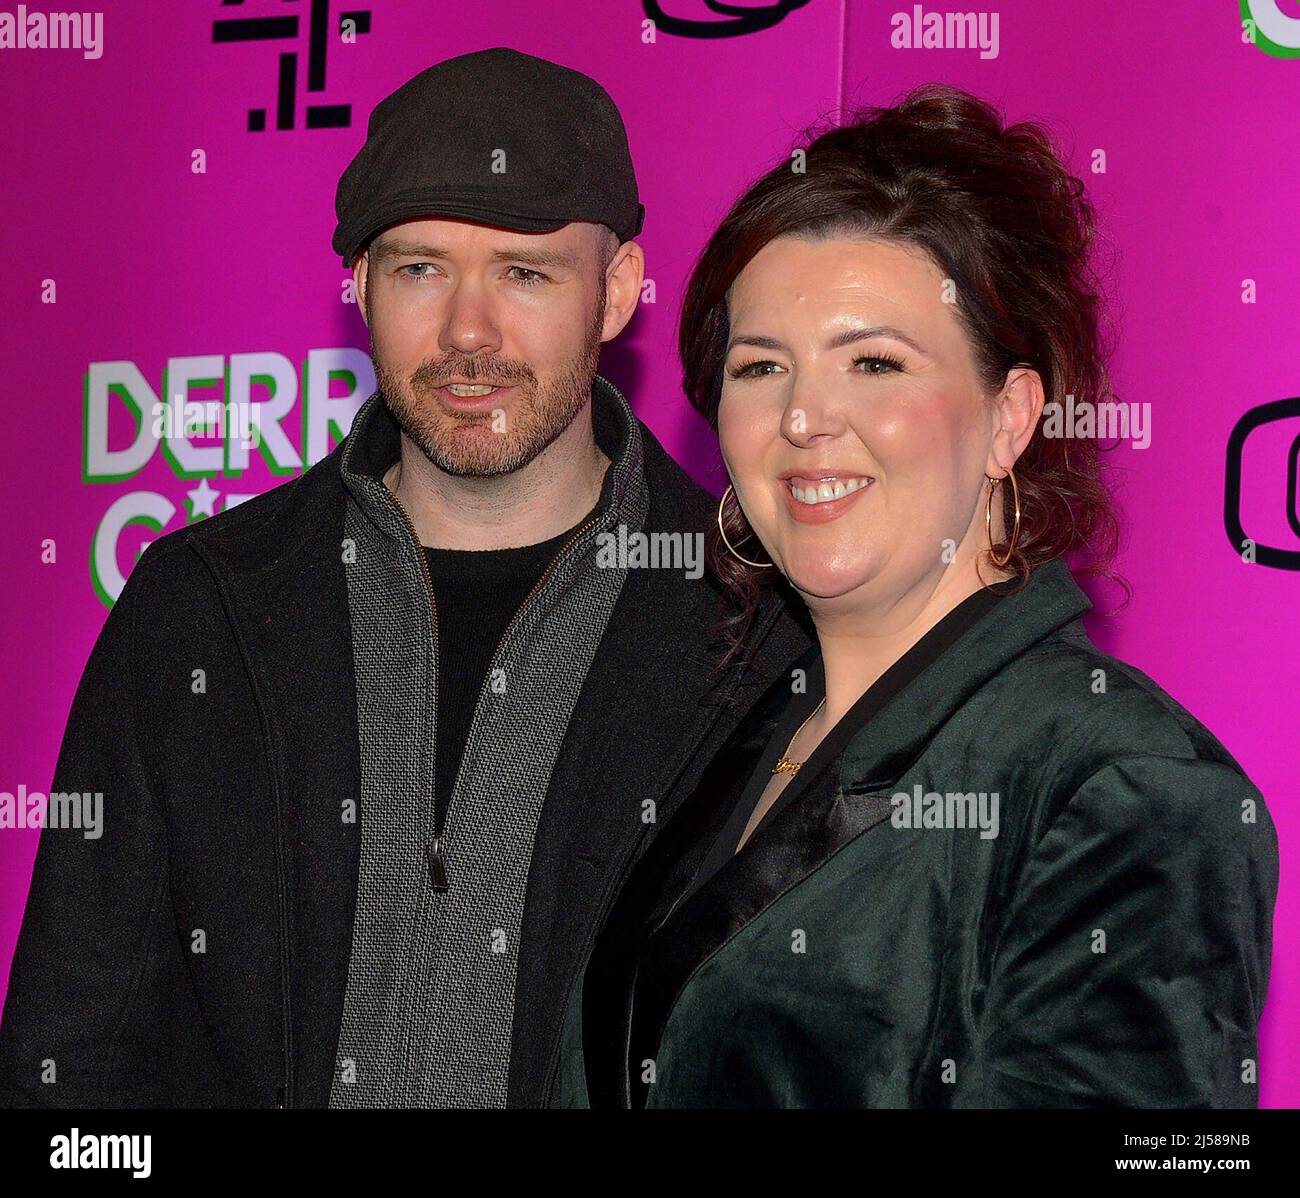 Creator and writer Lisa McGee with director Michael Lennox at the premiere of Derry Girls Season 3 in Derry, Londonderry, Northern Ireland, 7 April 2022. ©George Sweeney / Alamy Stock Photo Stock Photo